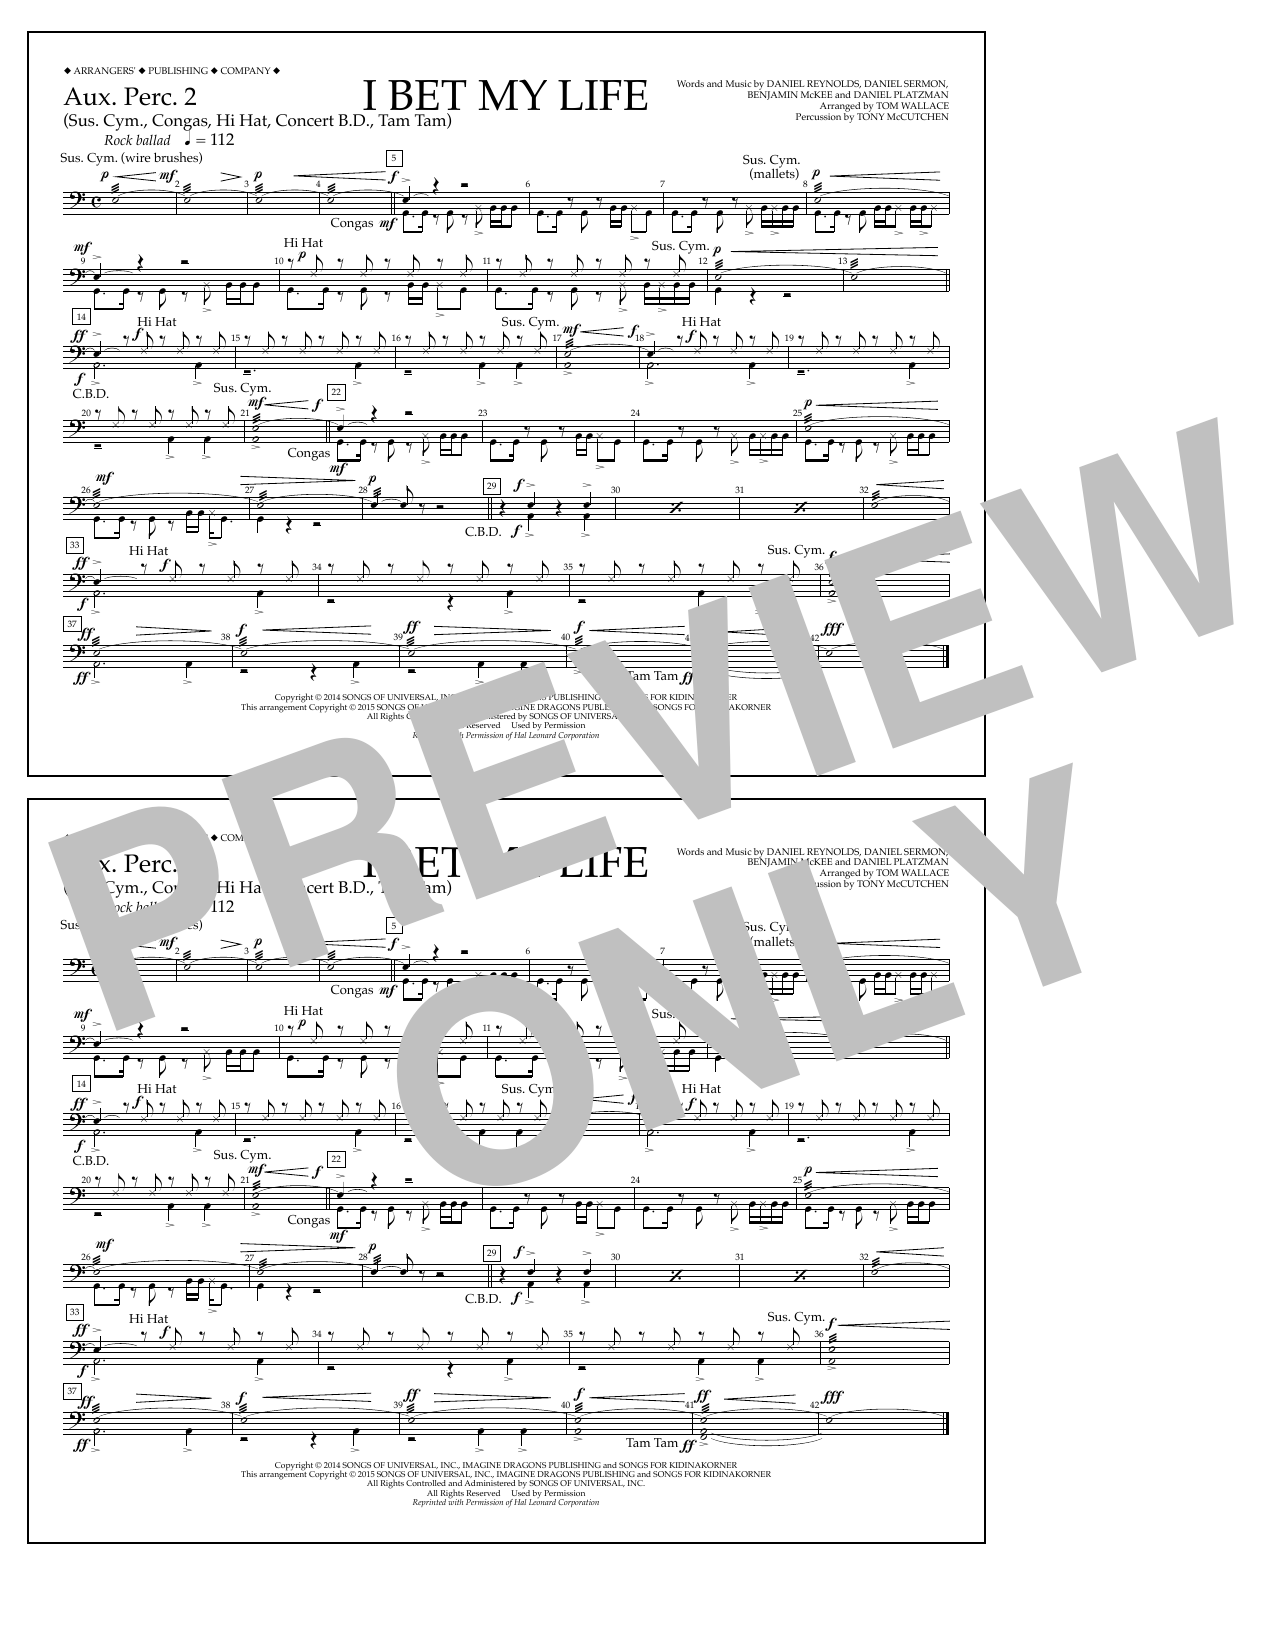 Download Tom Wallace I Bet My Life - Aux. Perc. 2 Sheet Music